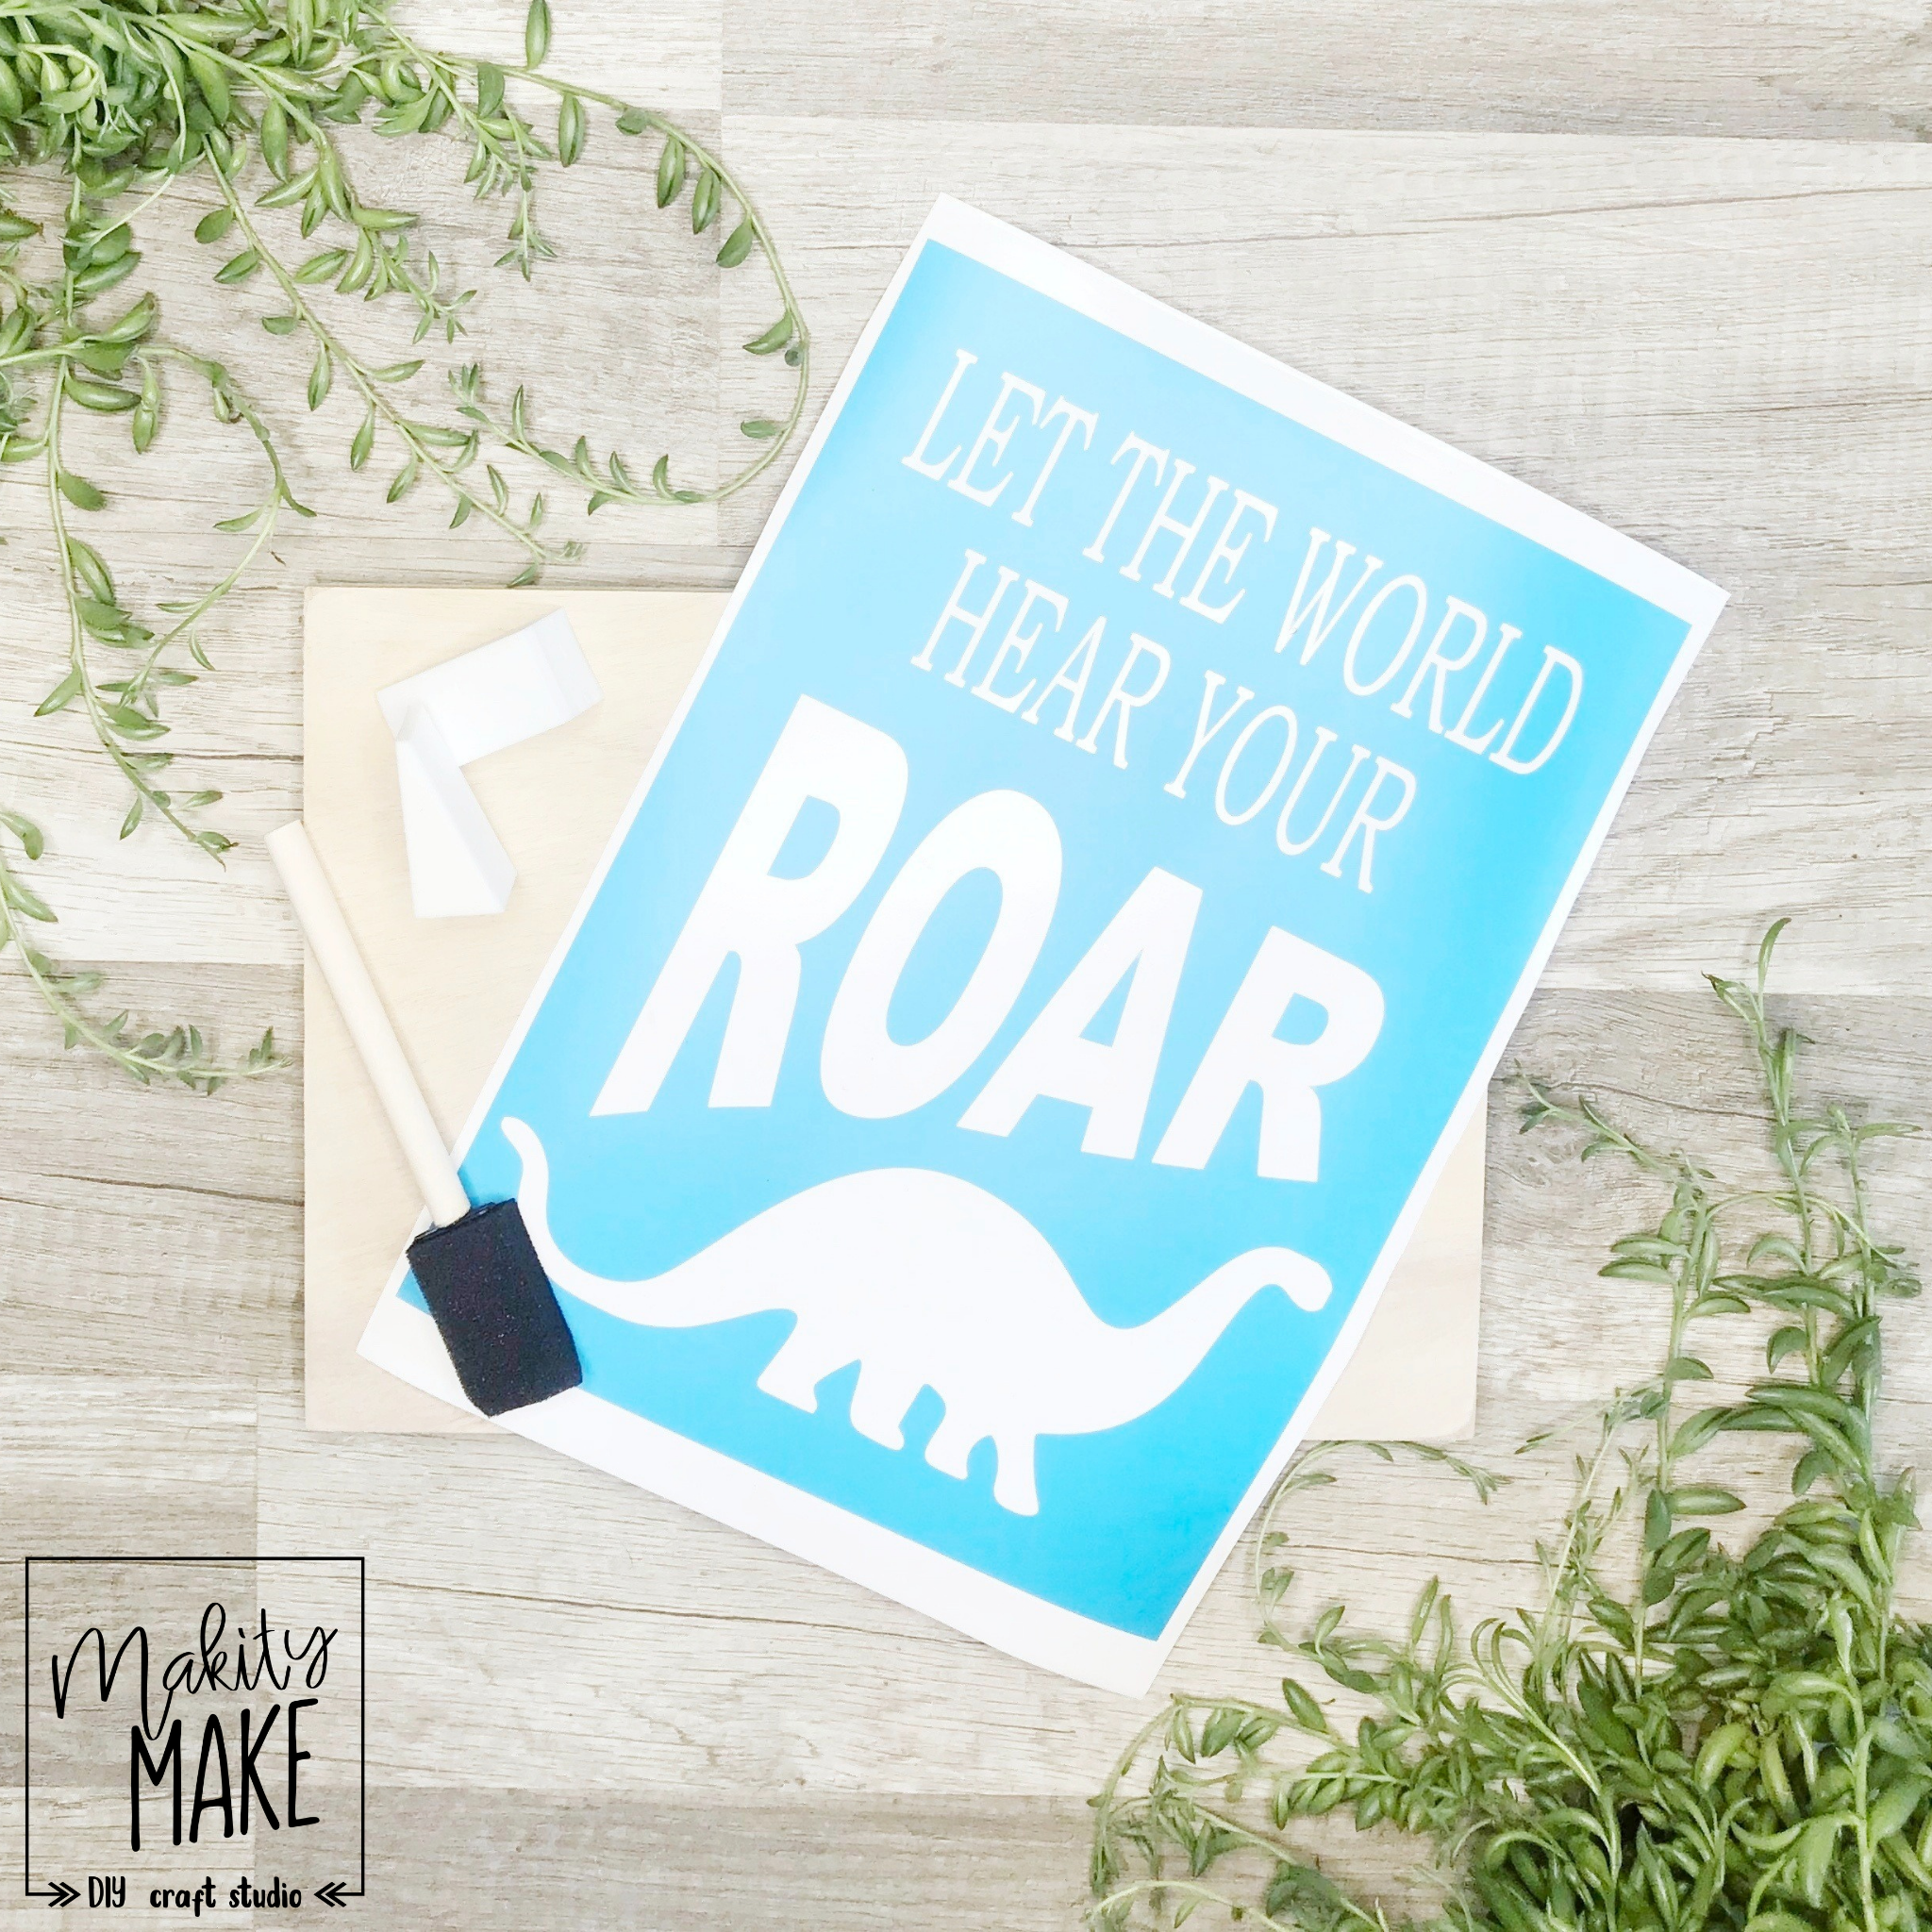 Let the World Hear you Roar Wood Sign Kit